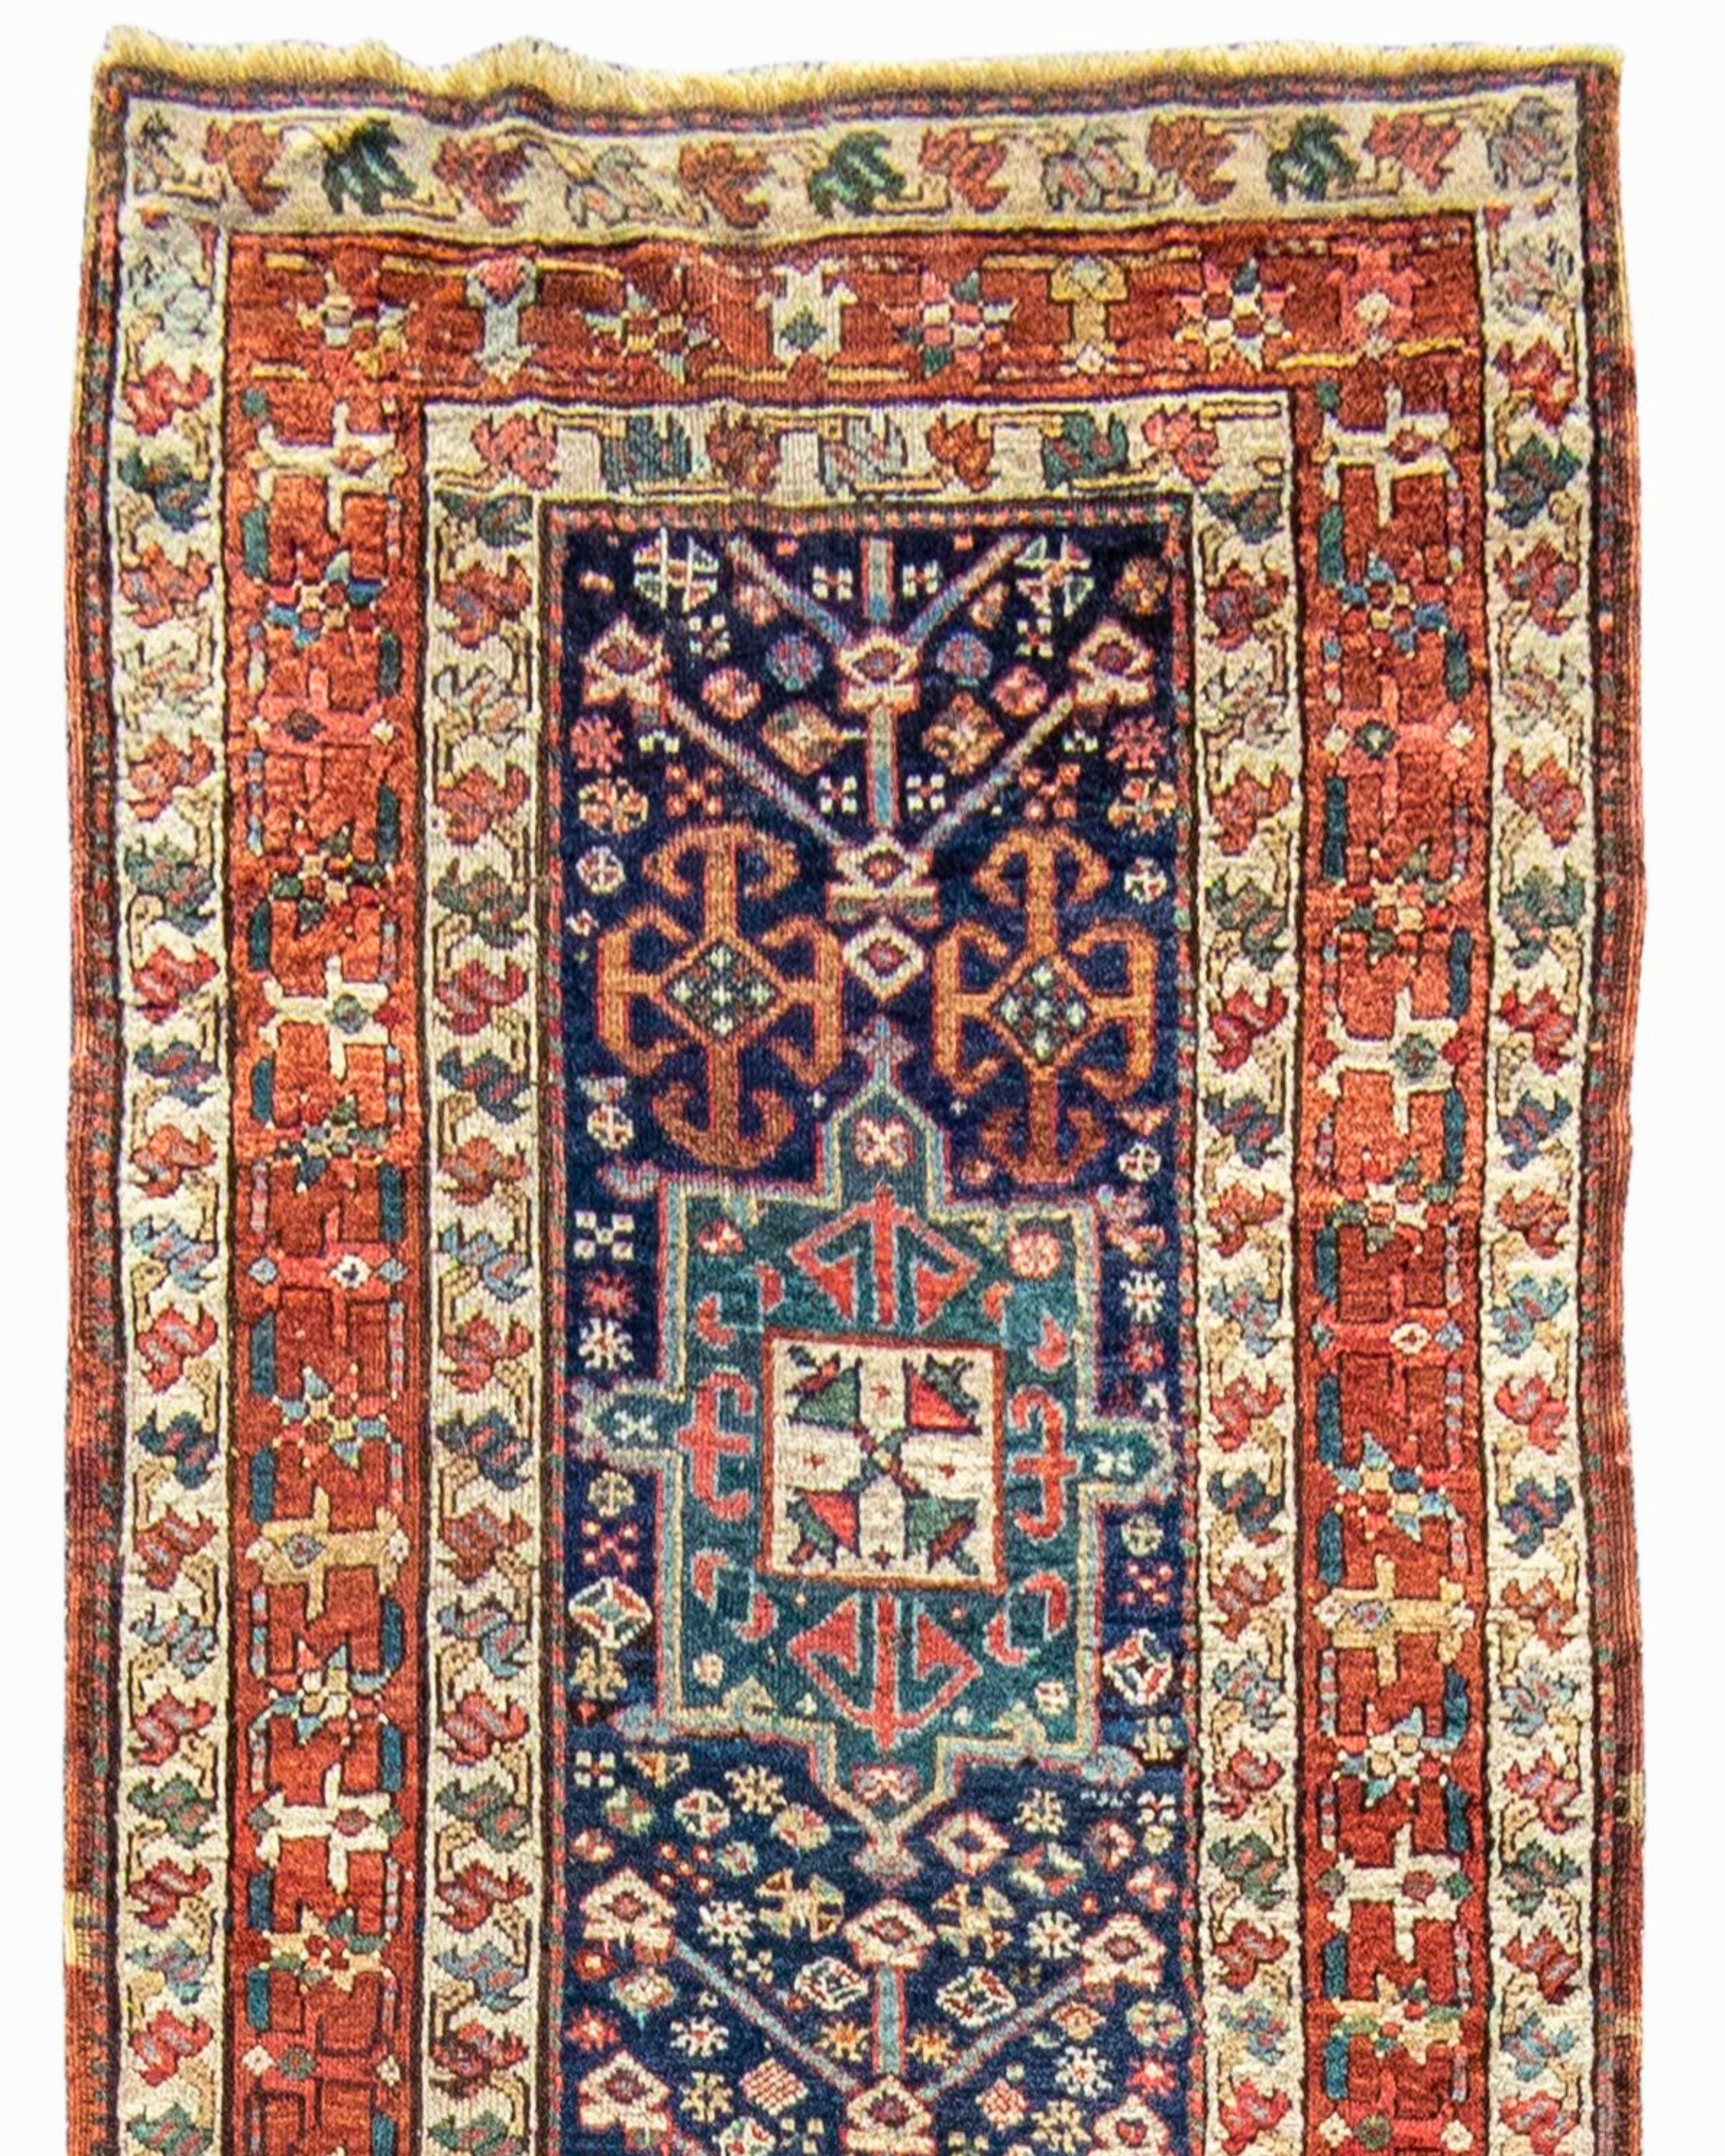 Hand-Woven Antique Persian Karadagh Runner, 19th Century For Sale